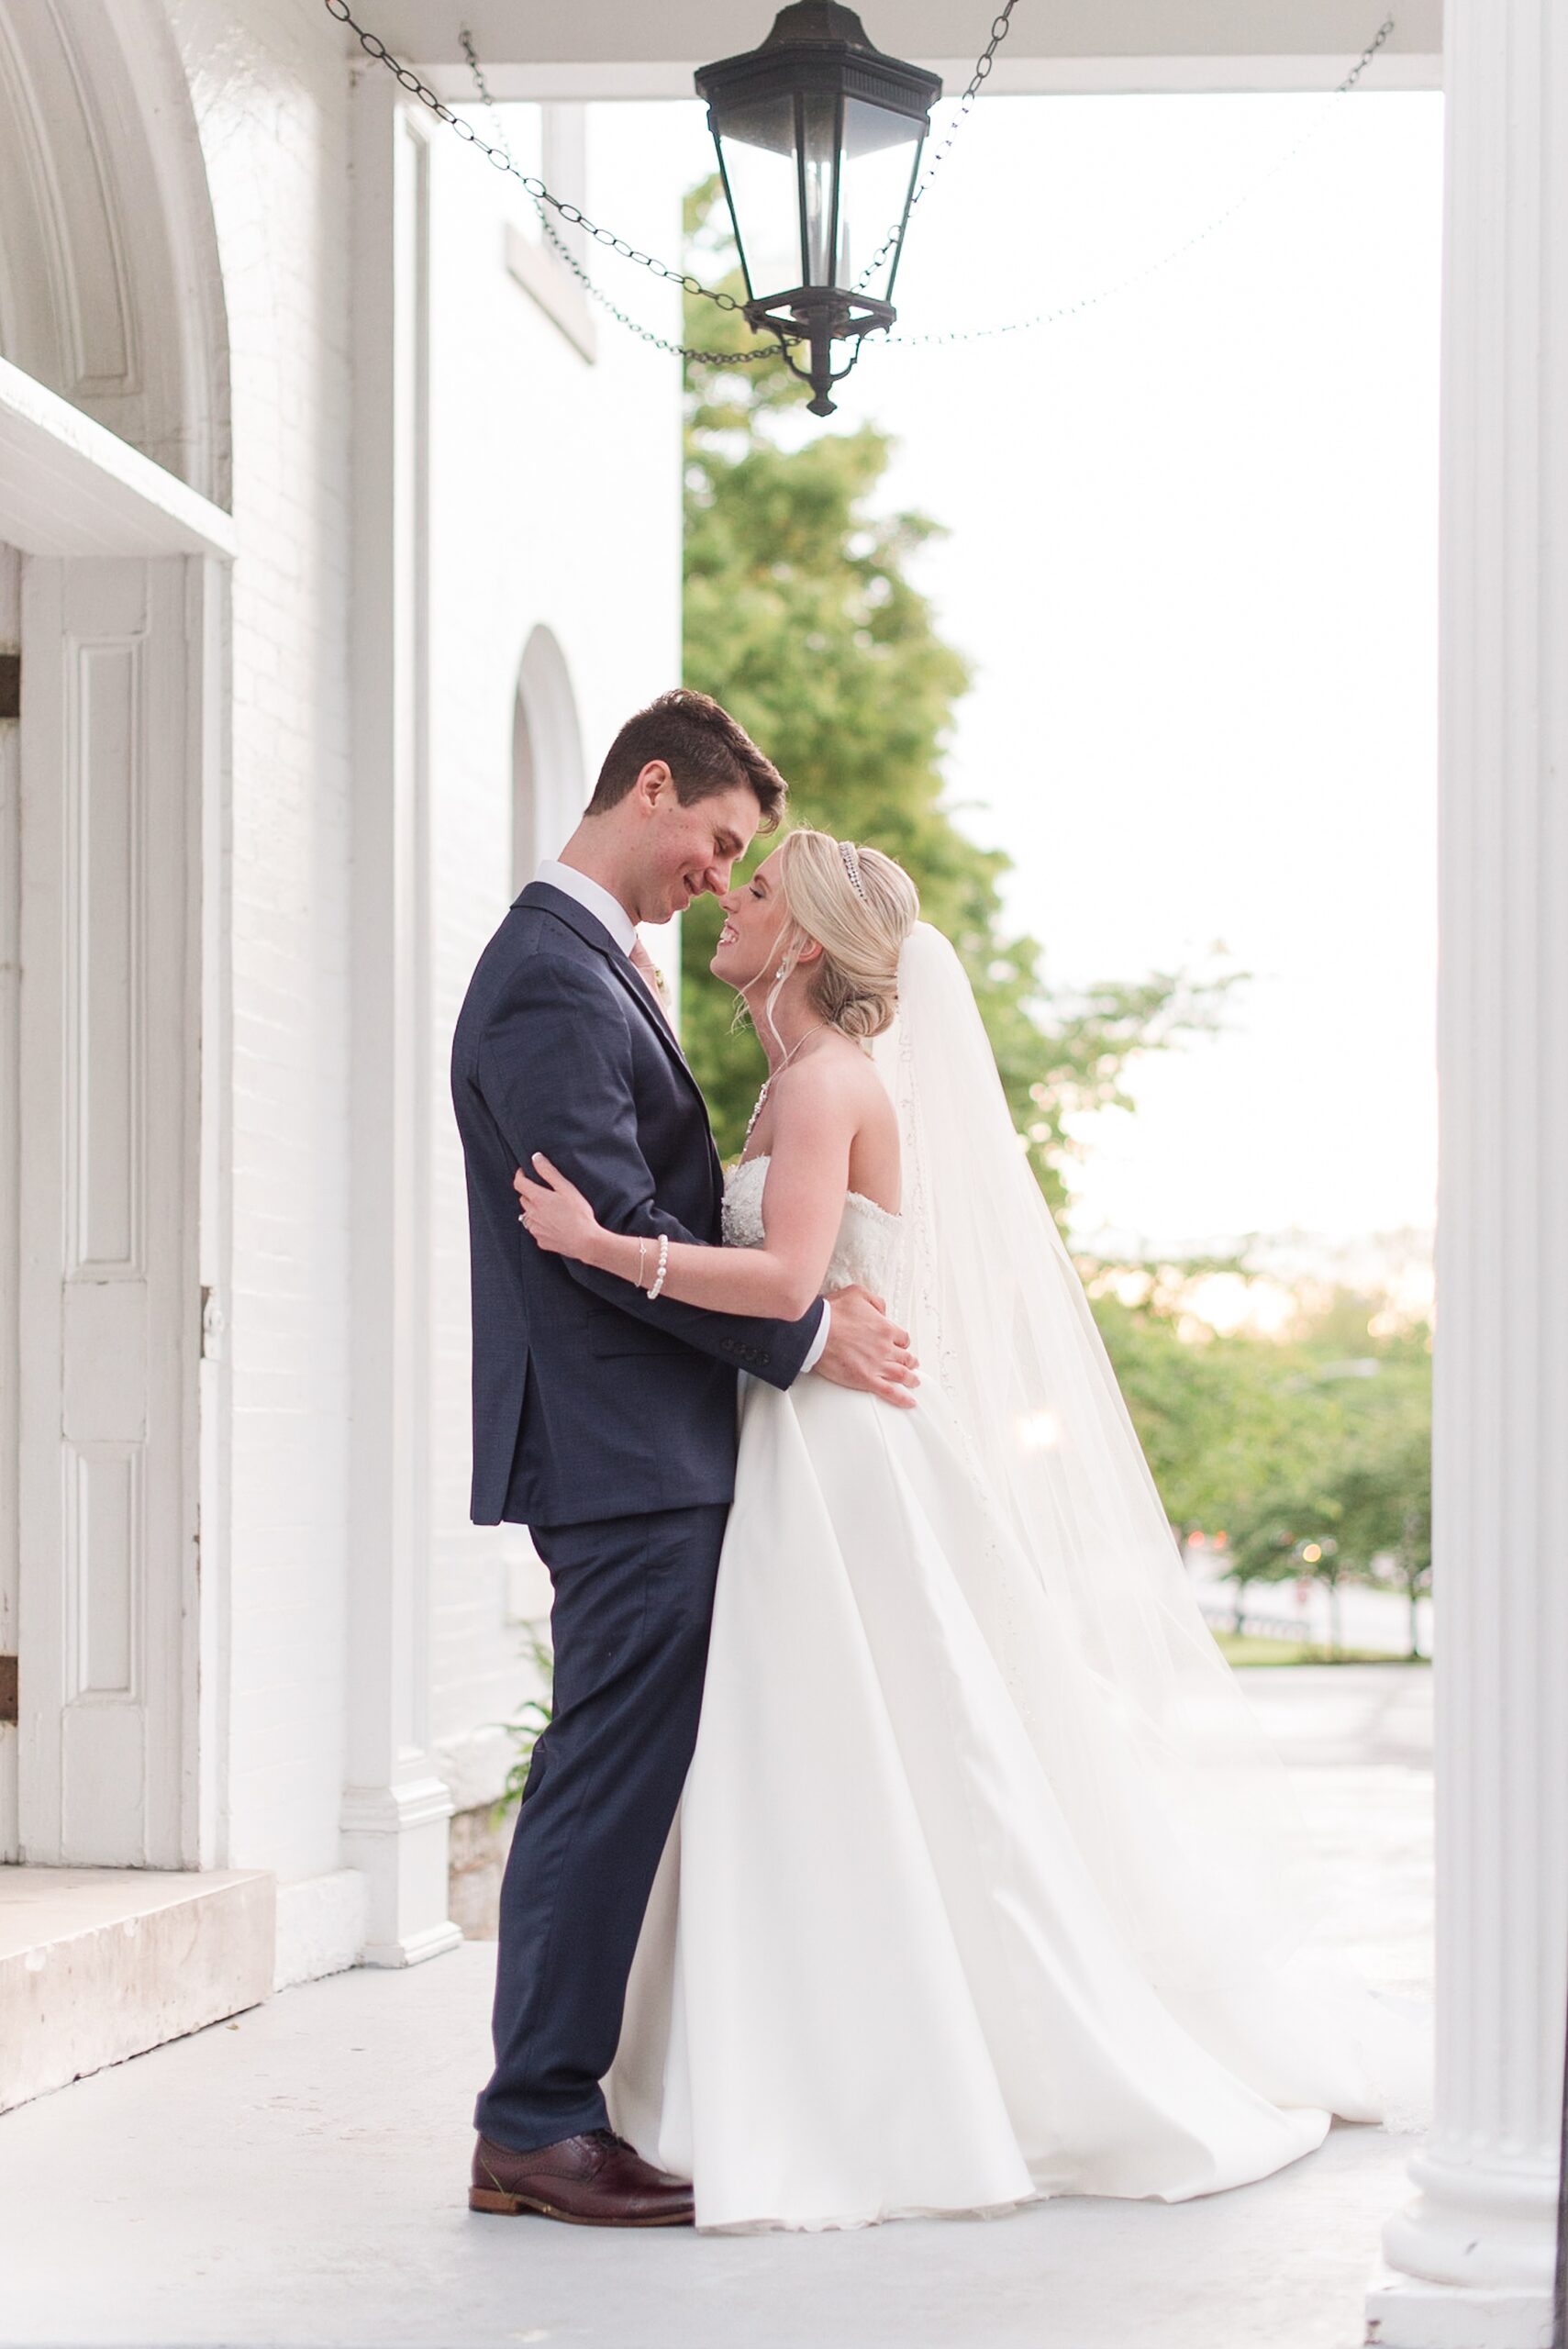 Newlyweds nuzzle noses while standing on a porch at sunset